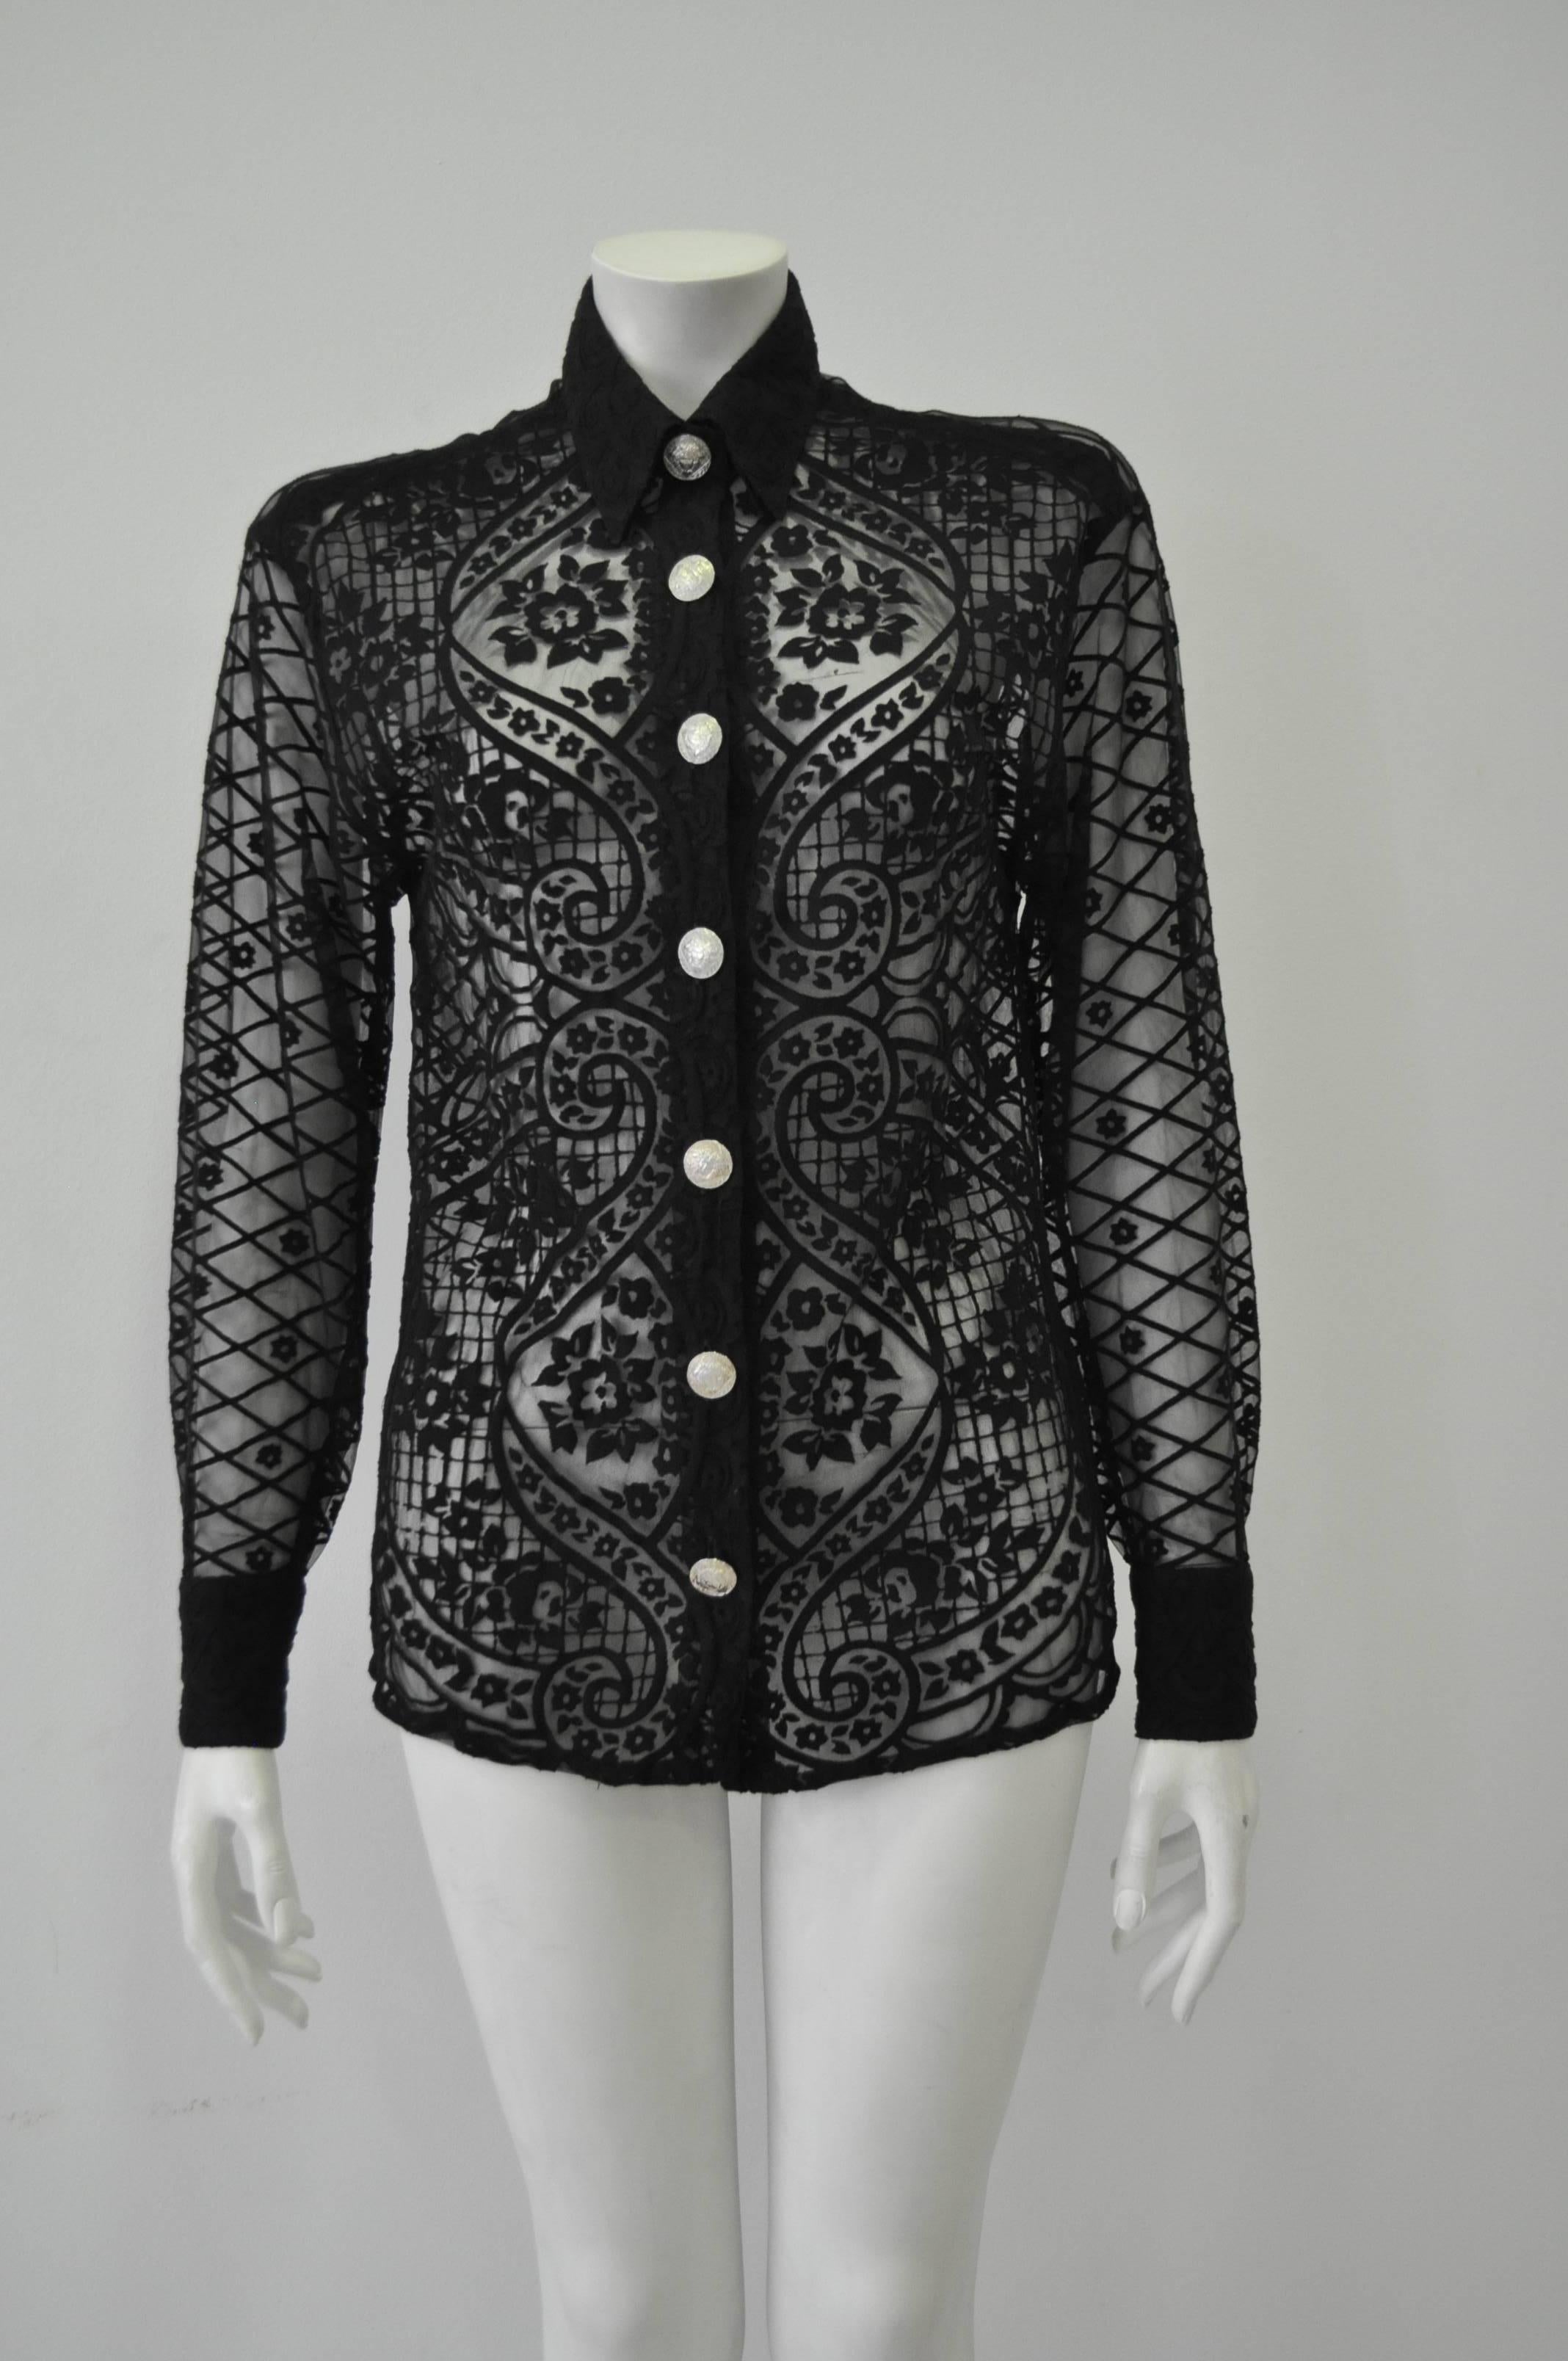 Exceptional Gianni Versace Couture Black Lace Shirt Featuring Prominent Silvertone Medusa Buttons